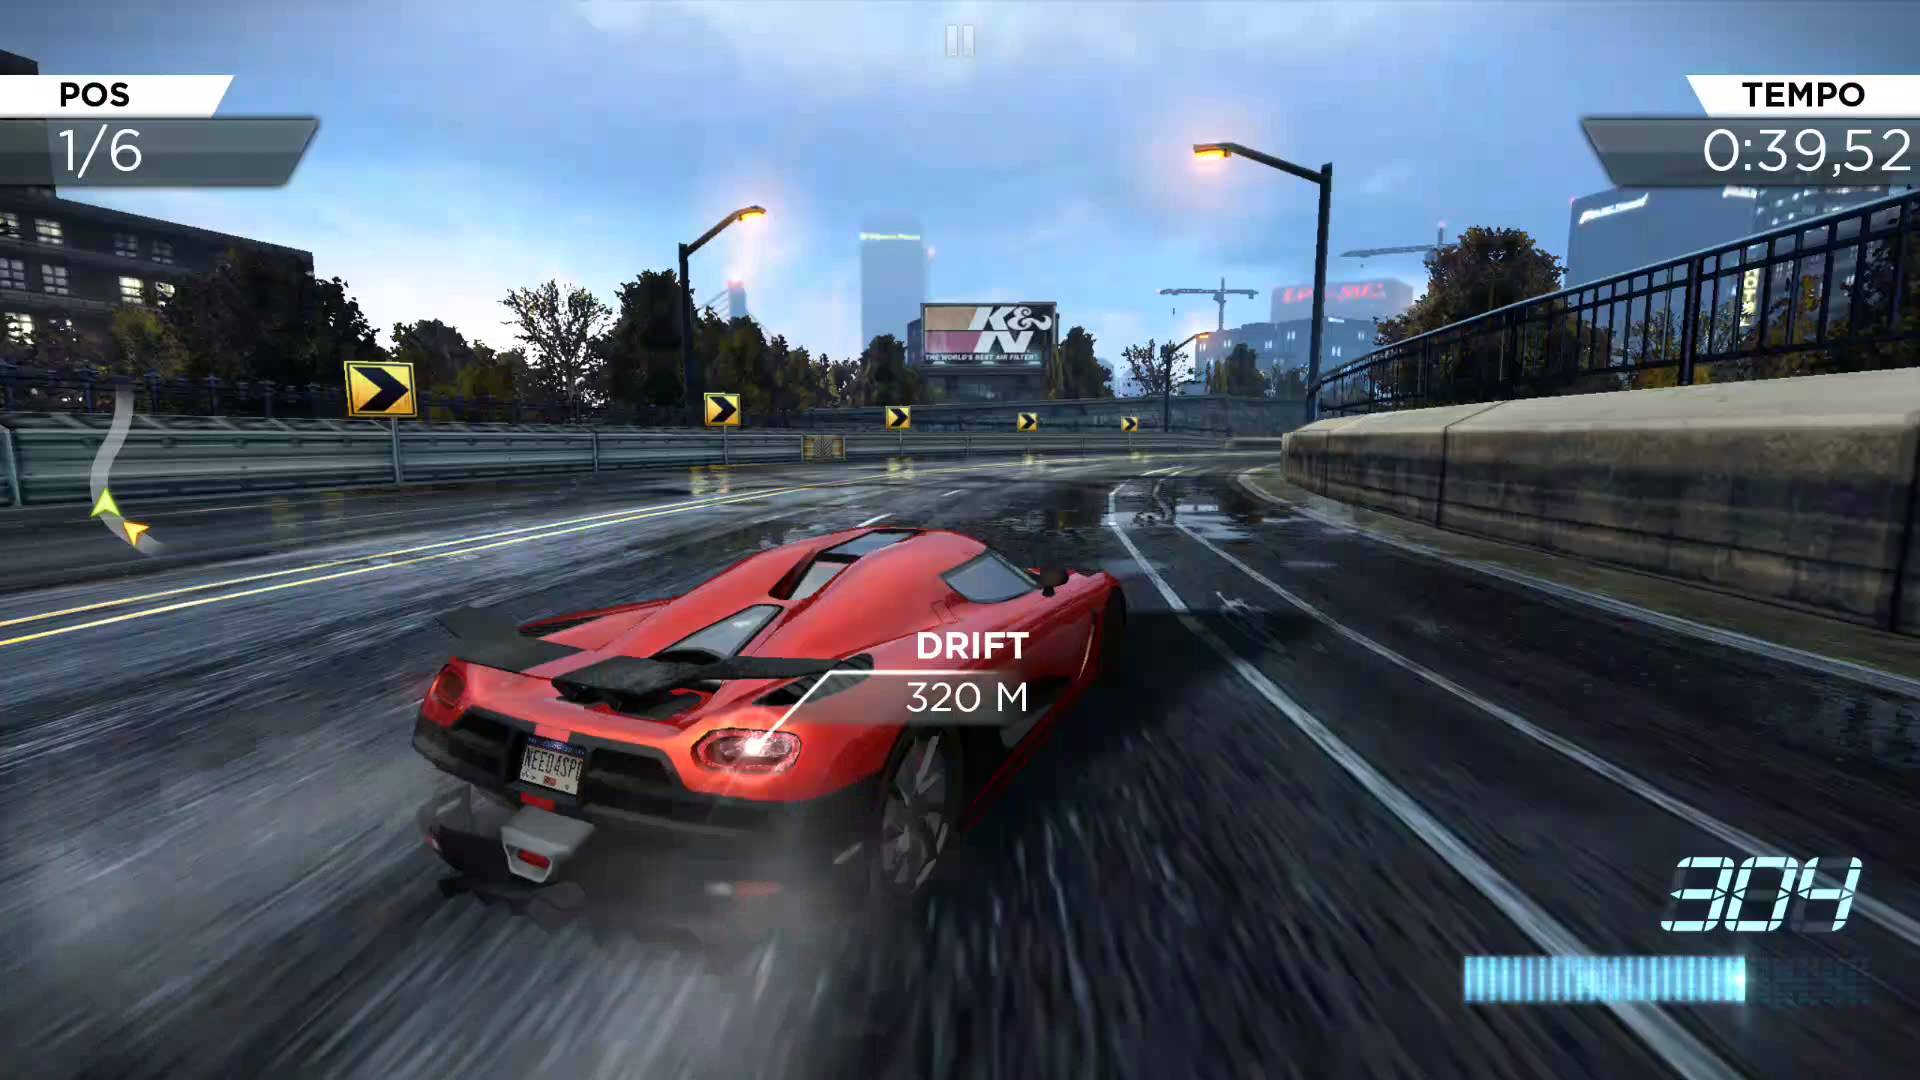 Игры page. NFS most wanted 2012 Android. Нфс 2012 андроид. Need for Speed most wanted 2012 на андроид. Need for Speed most wanted геймплей.